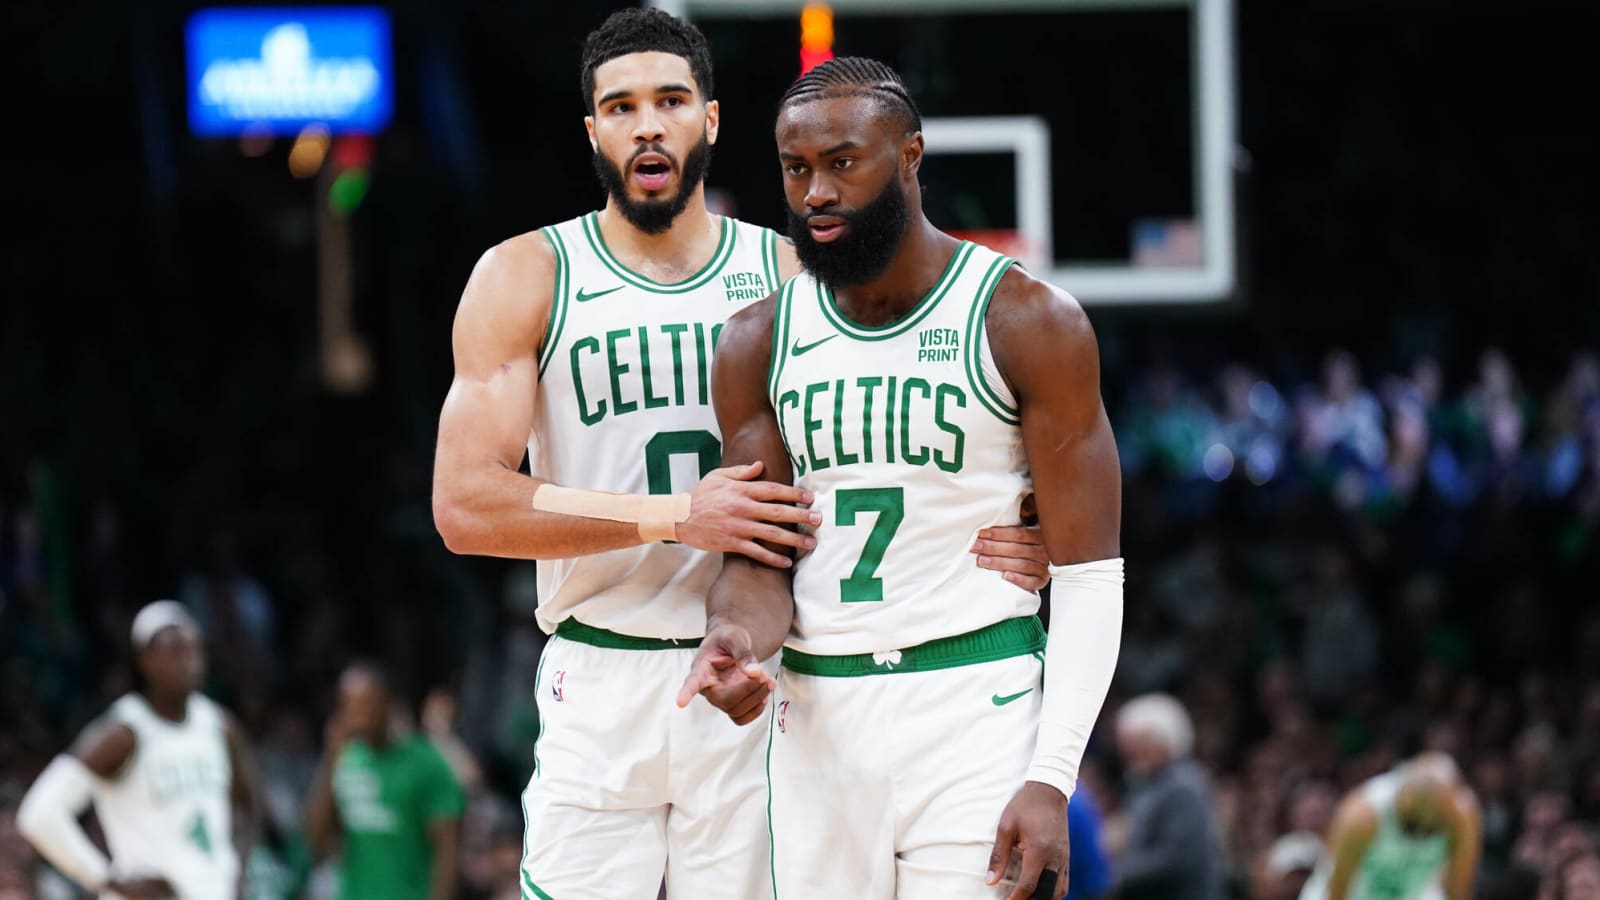 Are we heading toward a Celtics vs. Knicks Eastern Conference Finals?